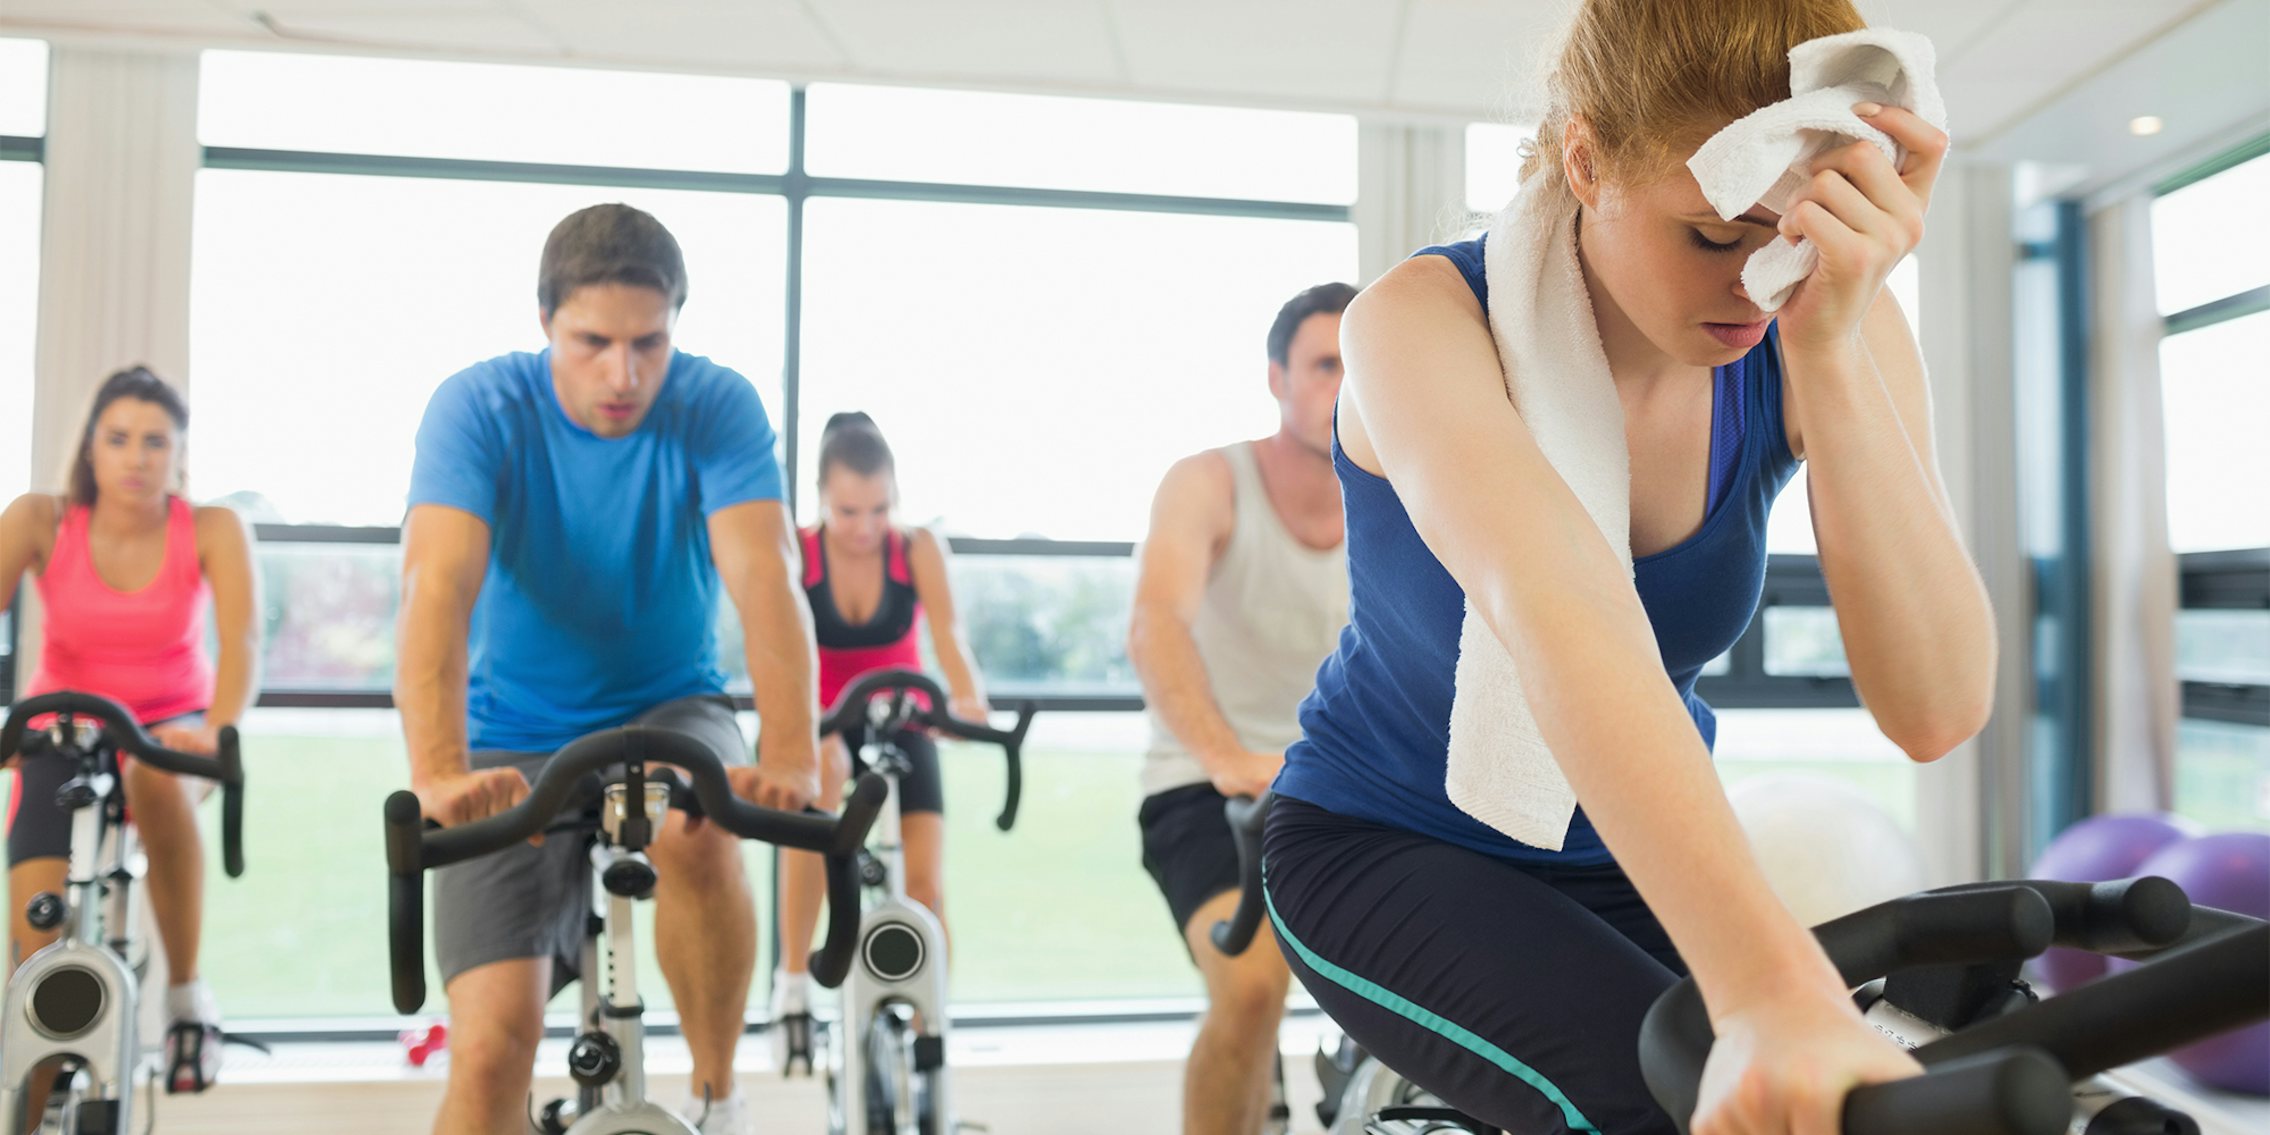 Determined and tired people working out at an exercise bike class in gym